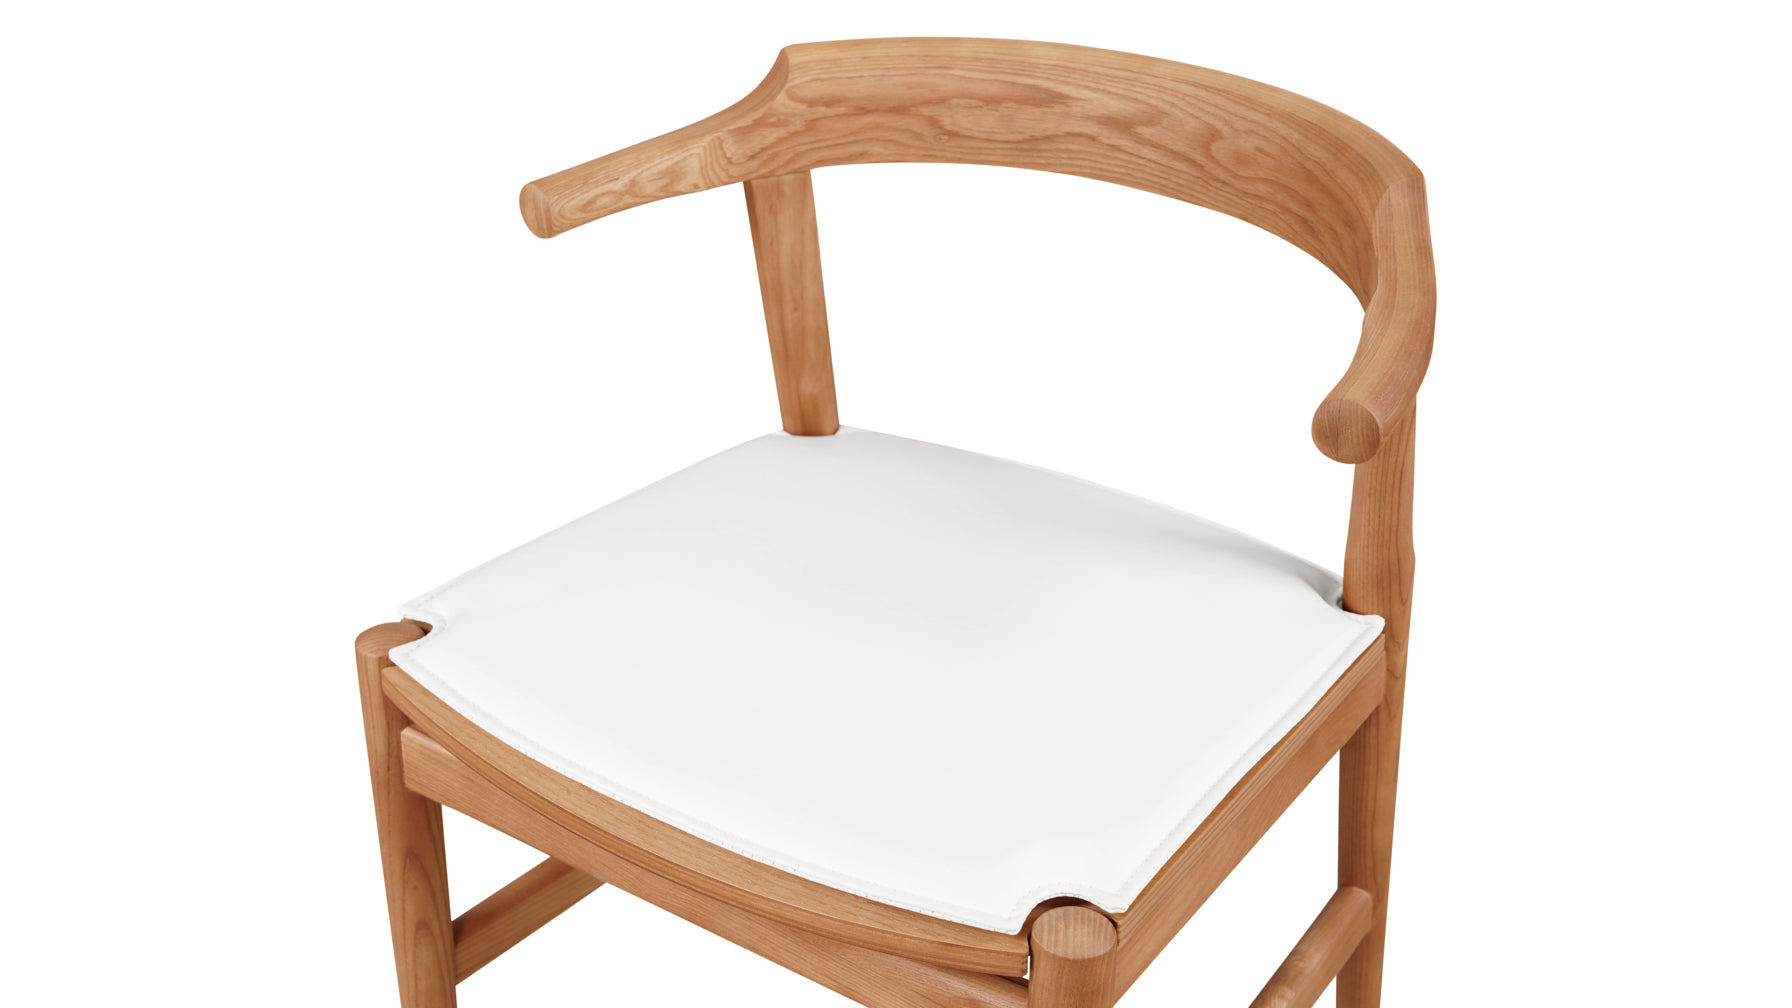 Tuck In Dining Chair with Cushion, White Oak, Wood Seat with White Cushion - Image 7